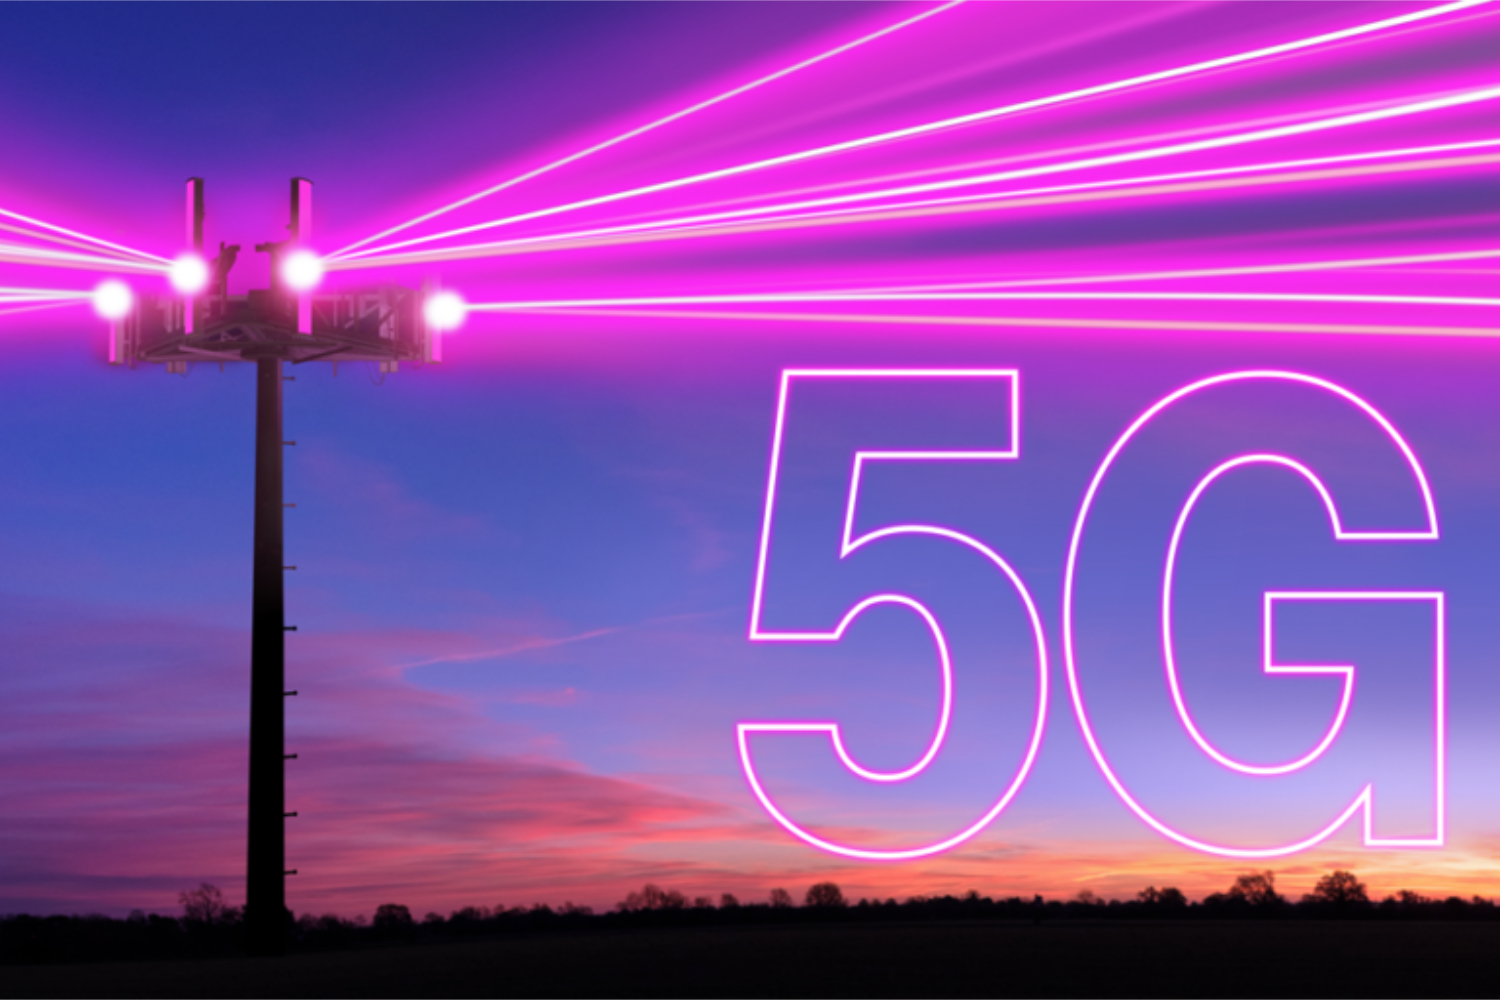 Big Win for Faster Internet: How T-Mobile's Latest 5G Move Leaves AT&T in the Dust